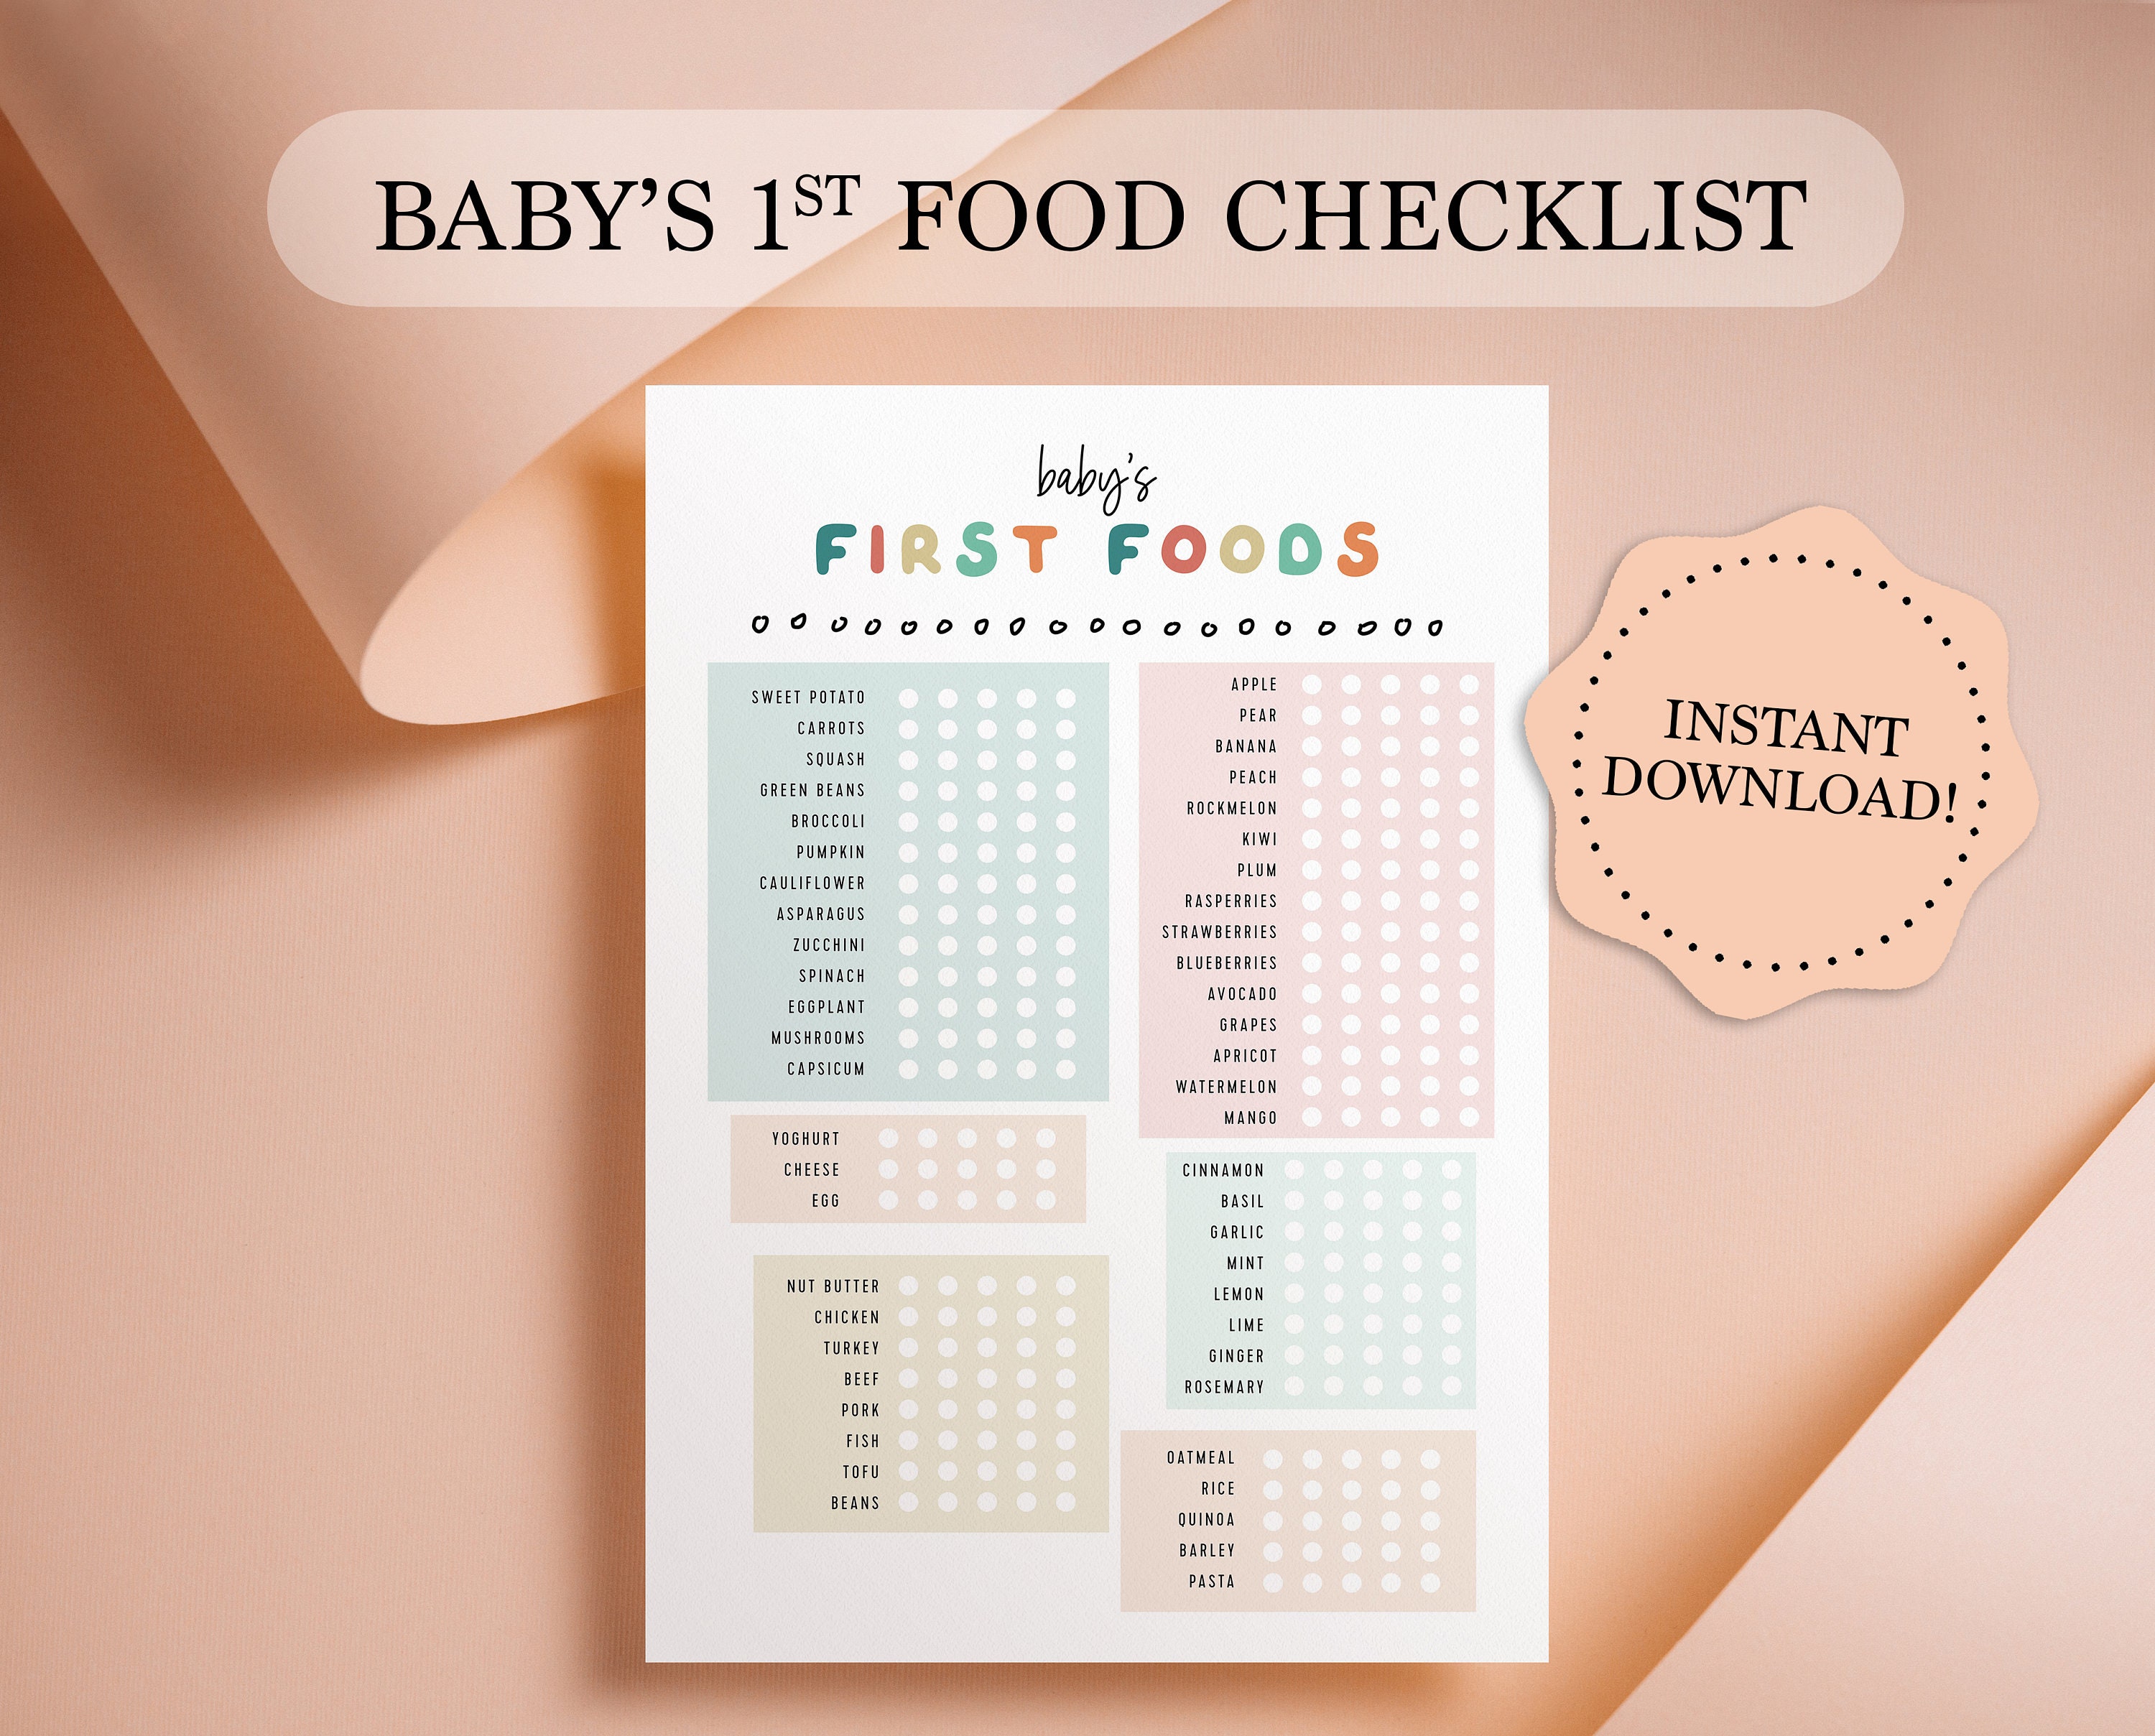 Baby Led Weaning Equipment - The Definitive List